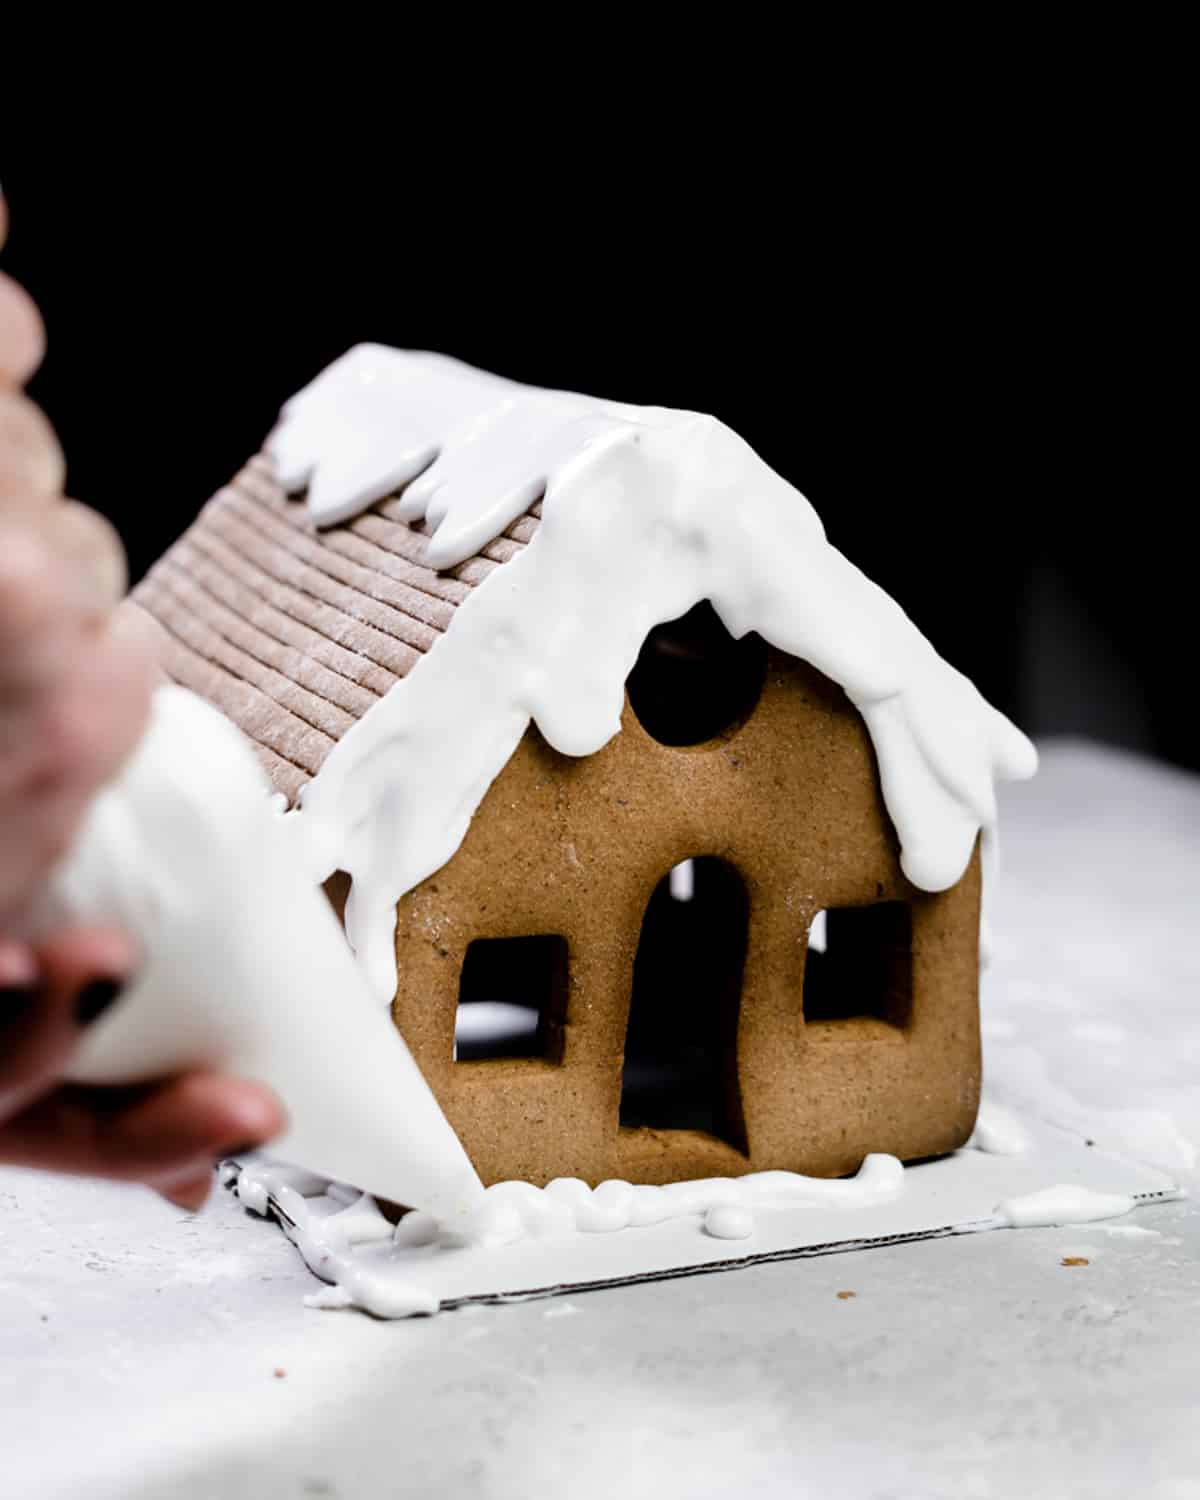 pouring royal icing over gingerbread house.